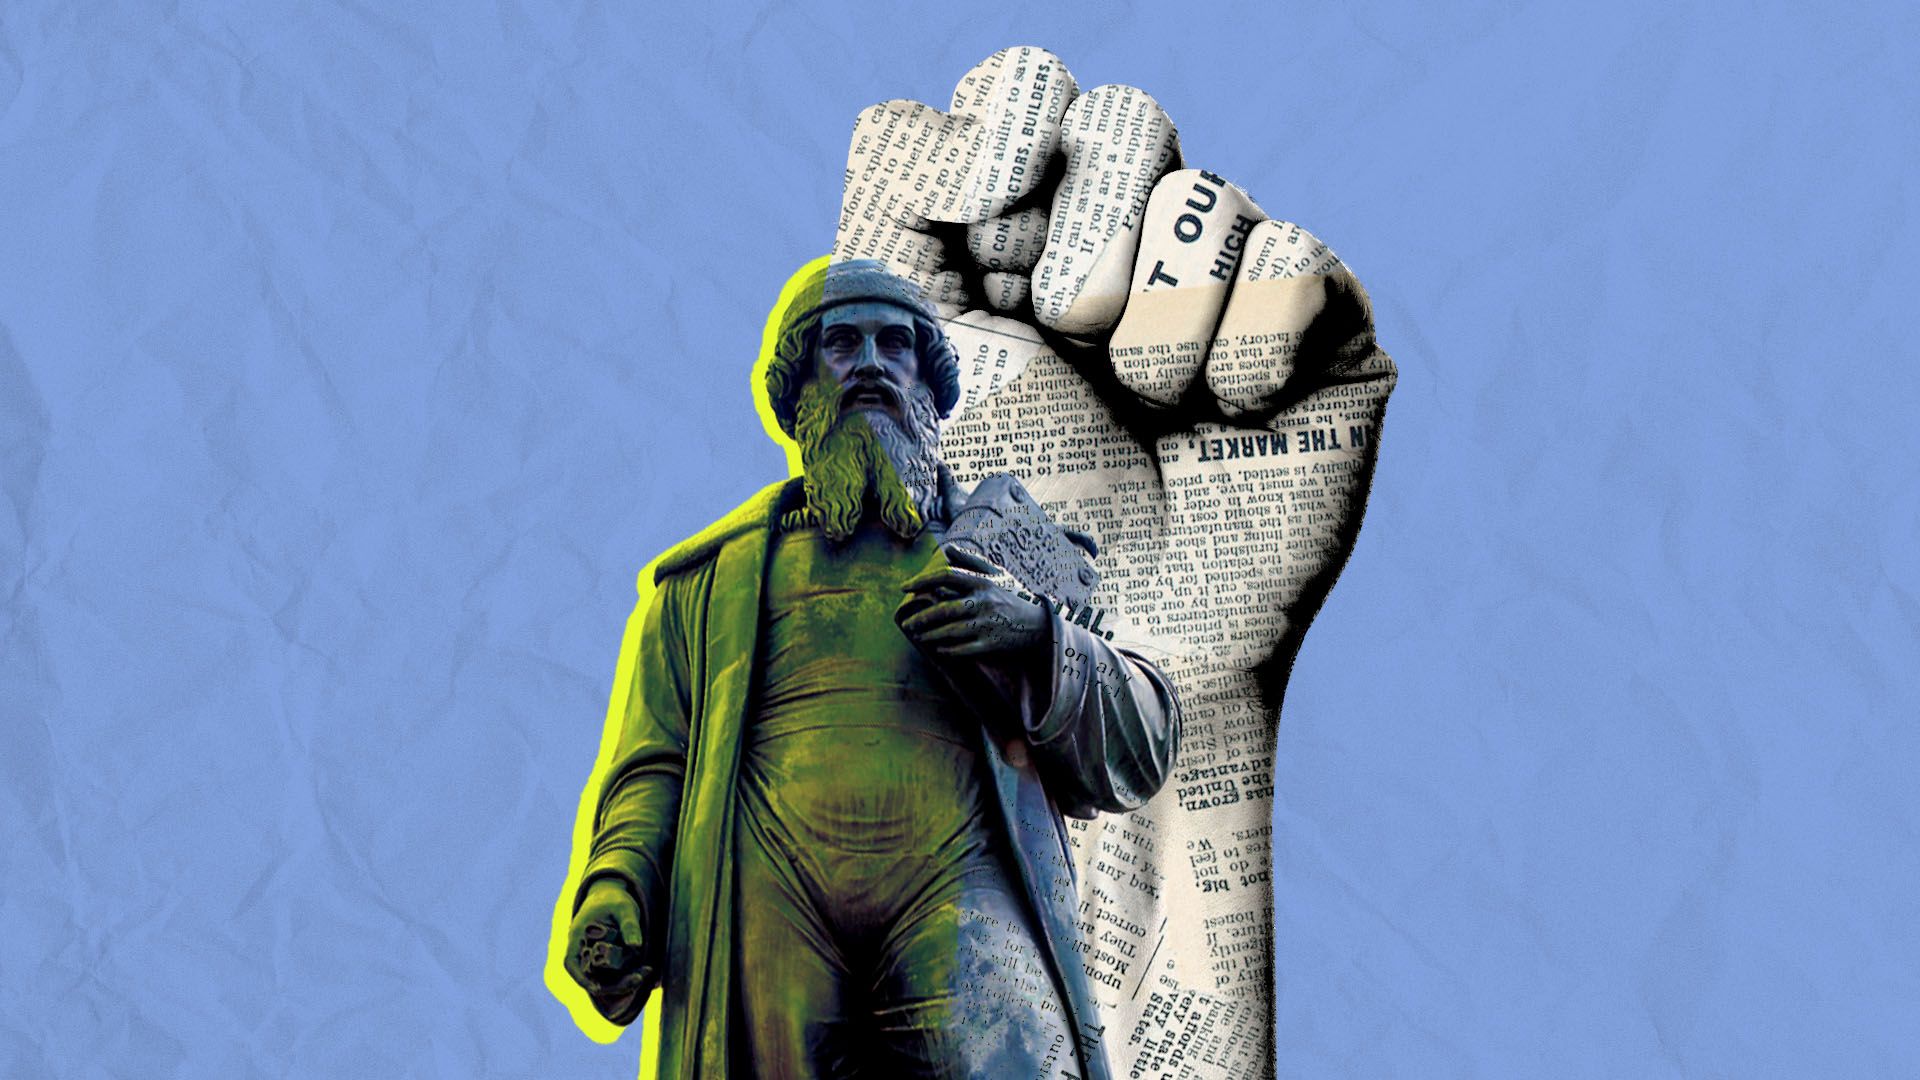 Illustration of Johannes Gutenberg statue with a raised fist behind him